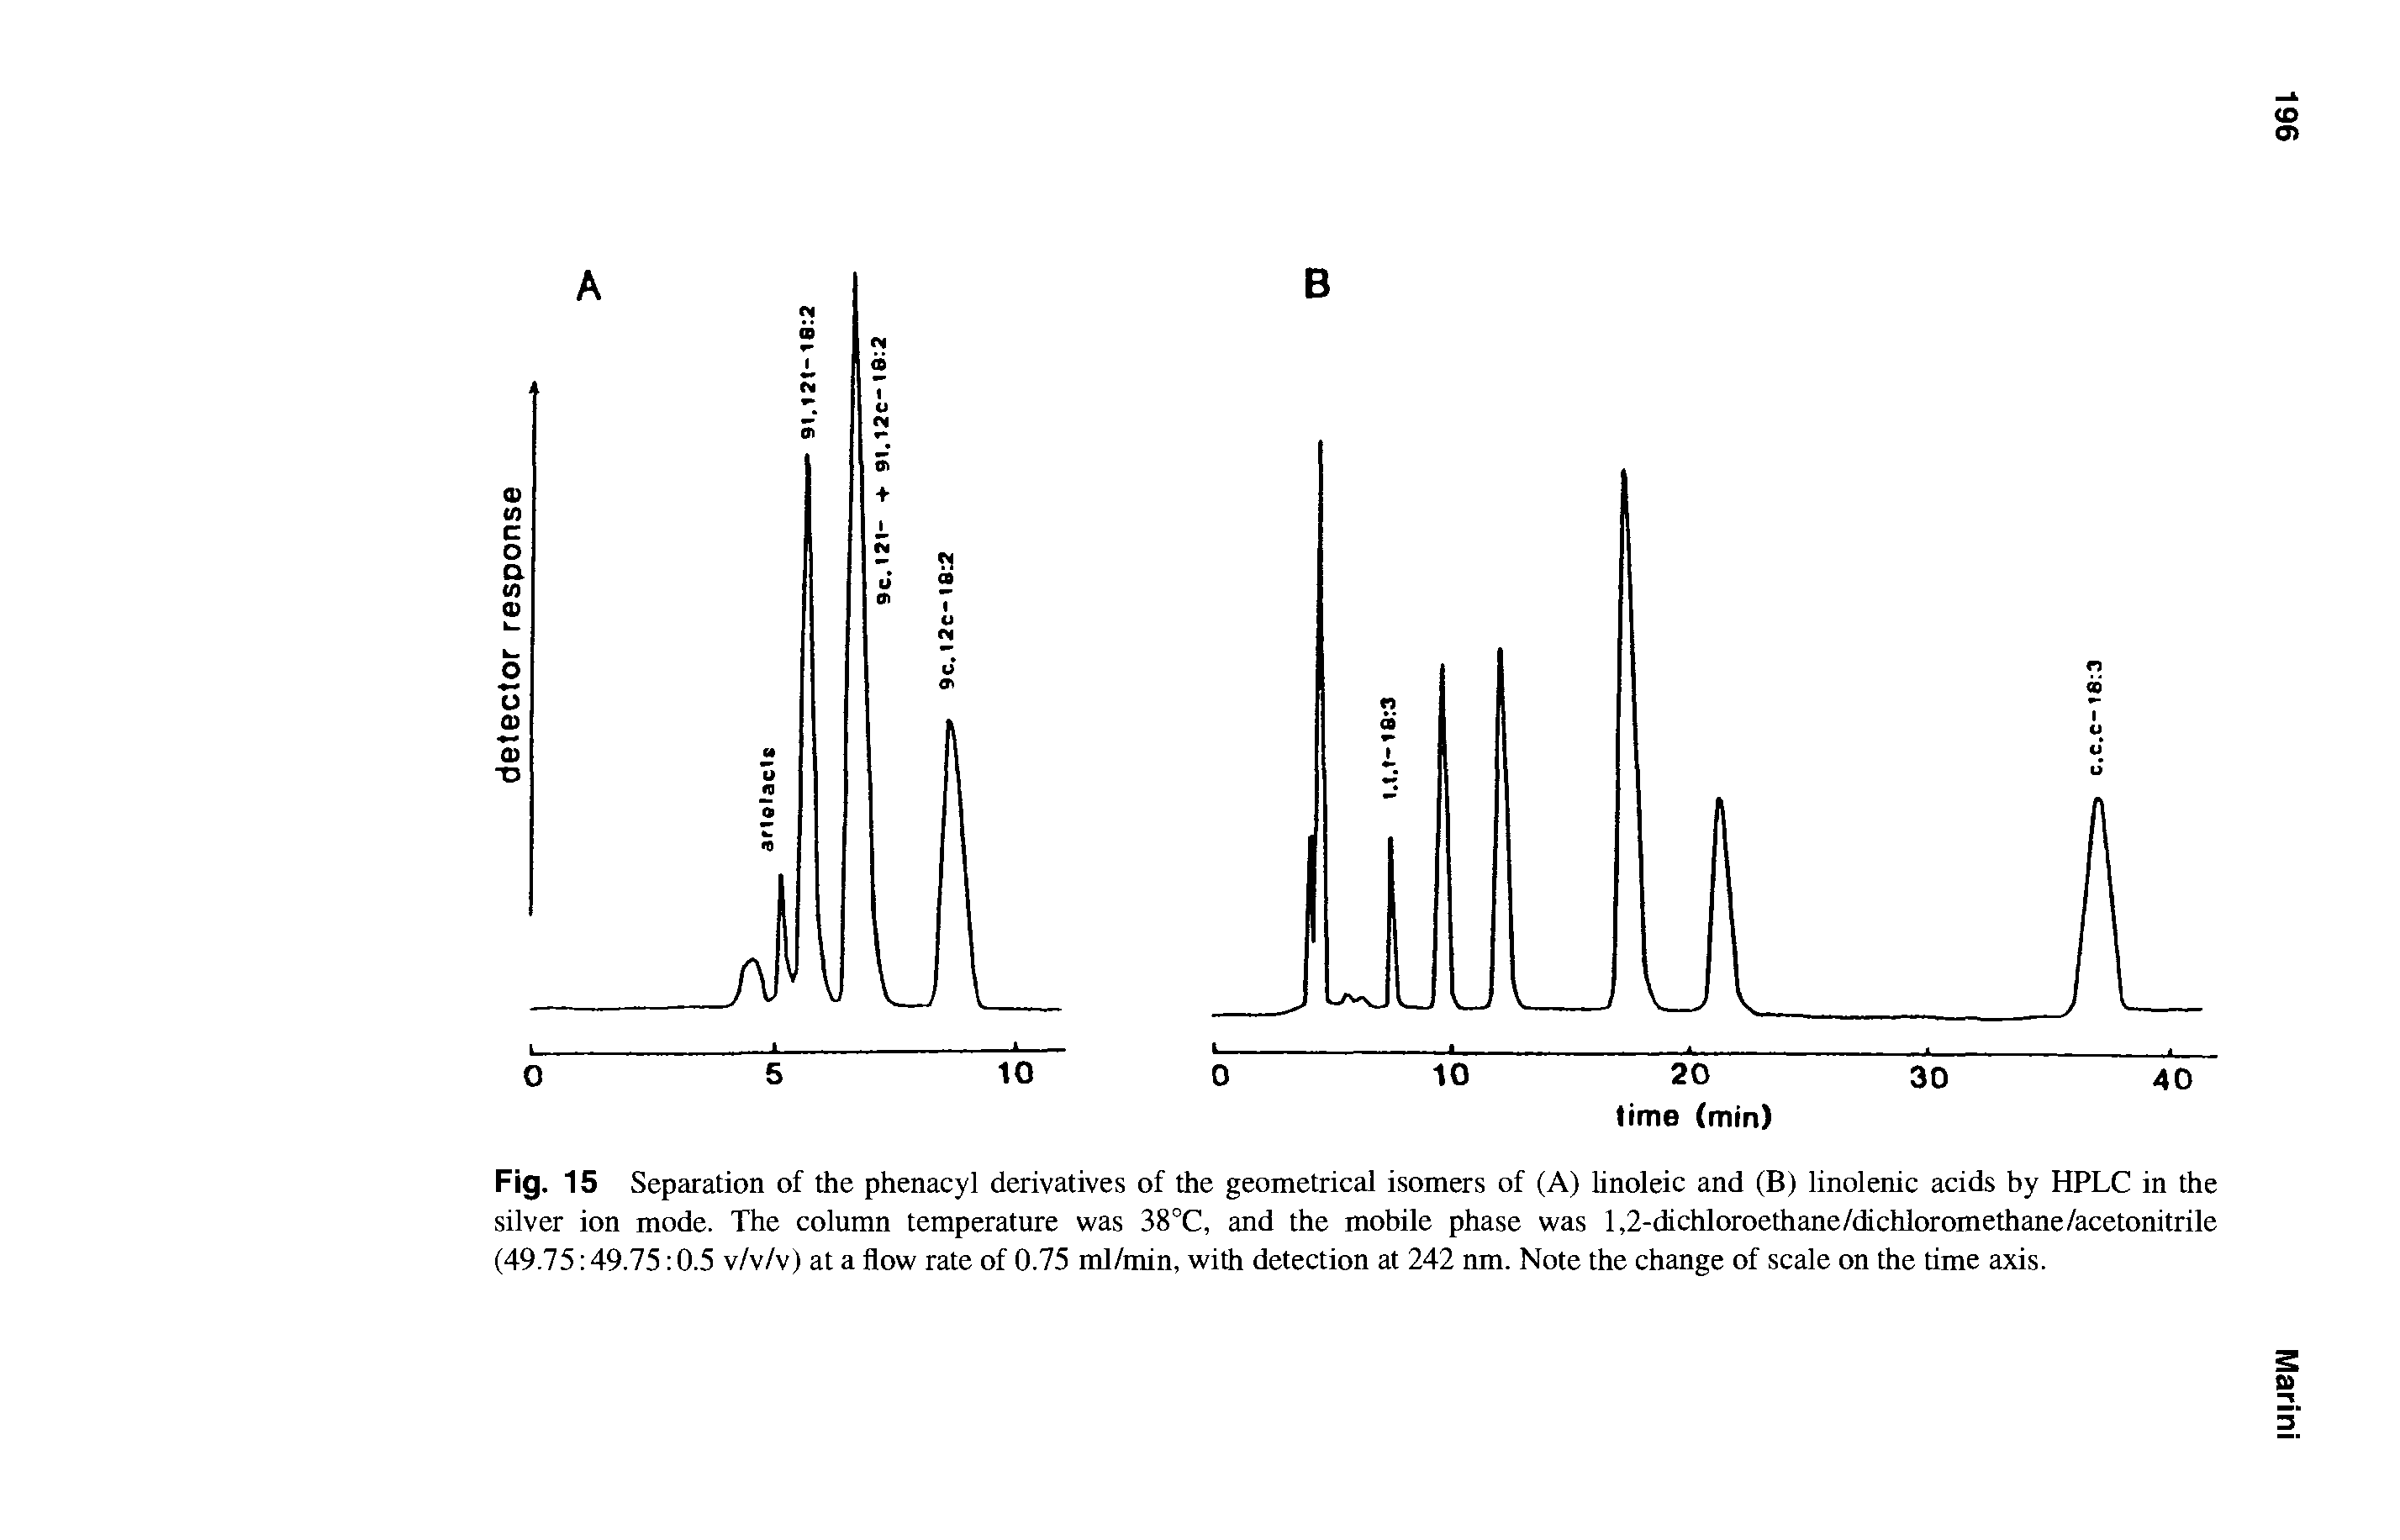 Fig. 15 Separation of the phenacyl derivatives of the geometrical isomers of (A) linoleic and (B) linolenic acids by HPLC in the silver ion mode. The column temperature was 38°C, and the mobile phase was 1,2-dichloroethane/dichloromethane/acetonitrile (49.75 49.75 0.5 v/v/v) at a flow rate of 0.75 ml/min, with detection at 242 nm. Note the change of scale on the time axis.